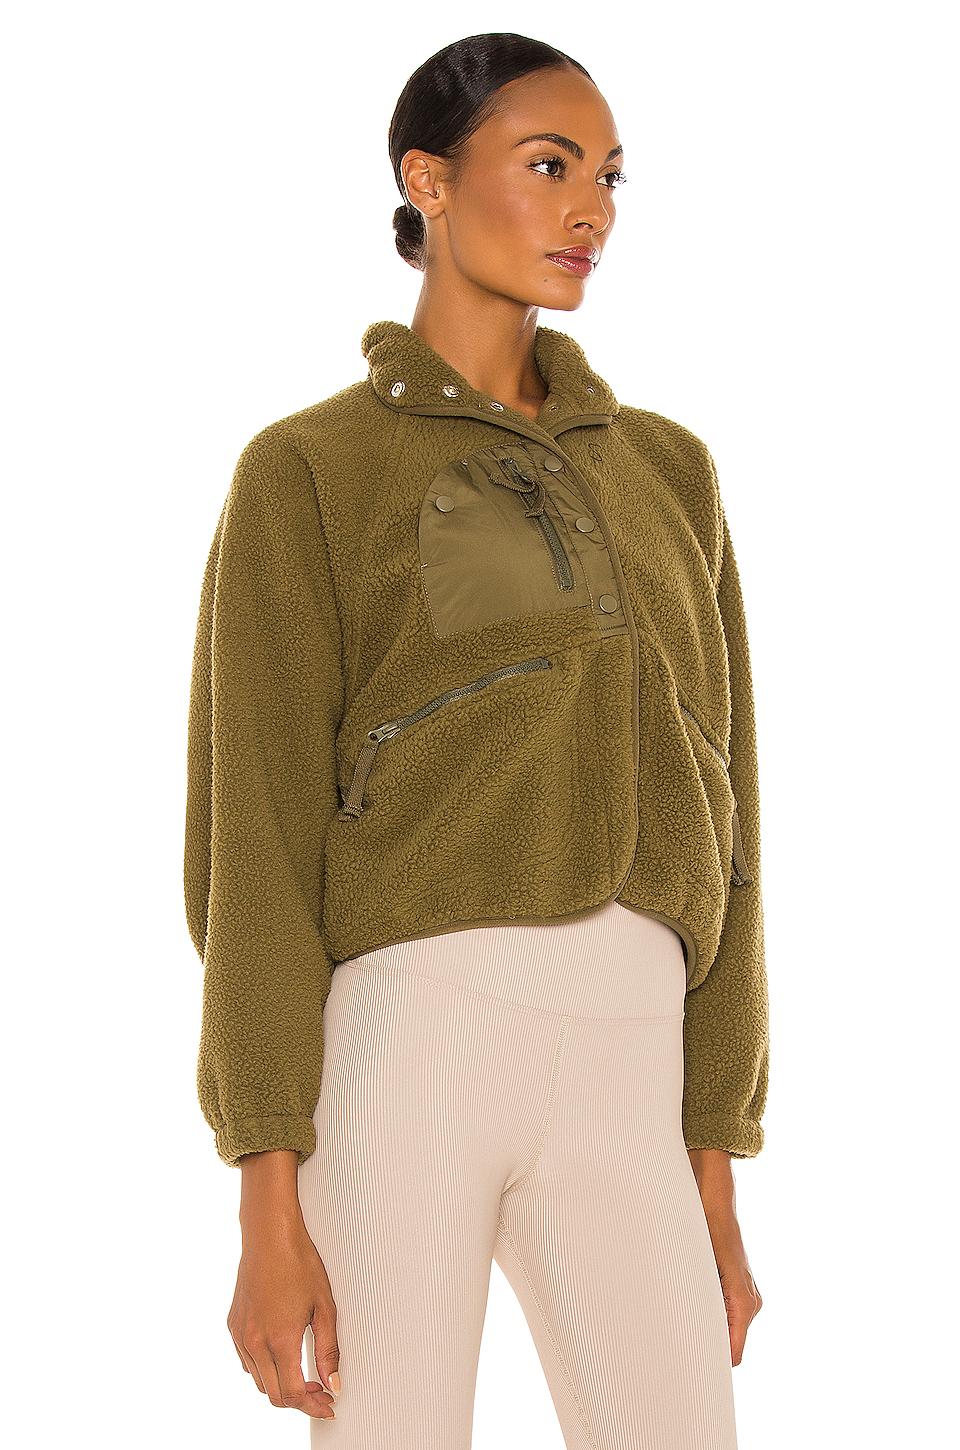 Free People X Fp Movement Hit The Slopes Jacket in Army (Green) Lyst